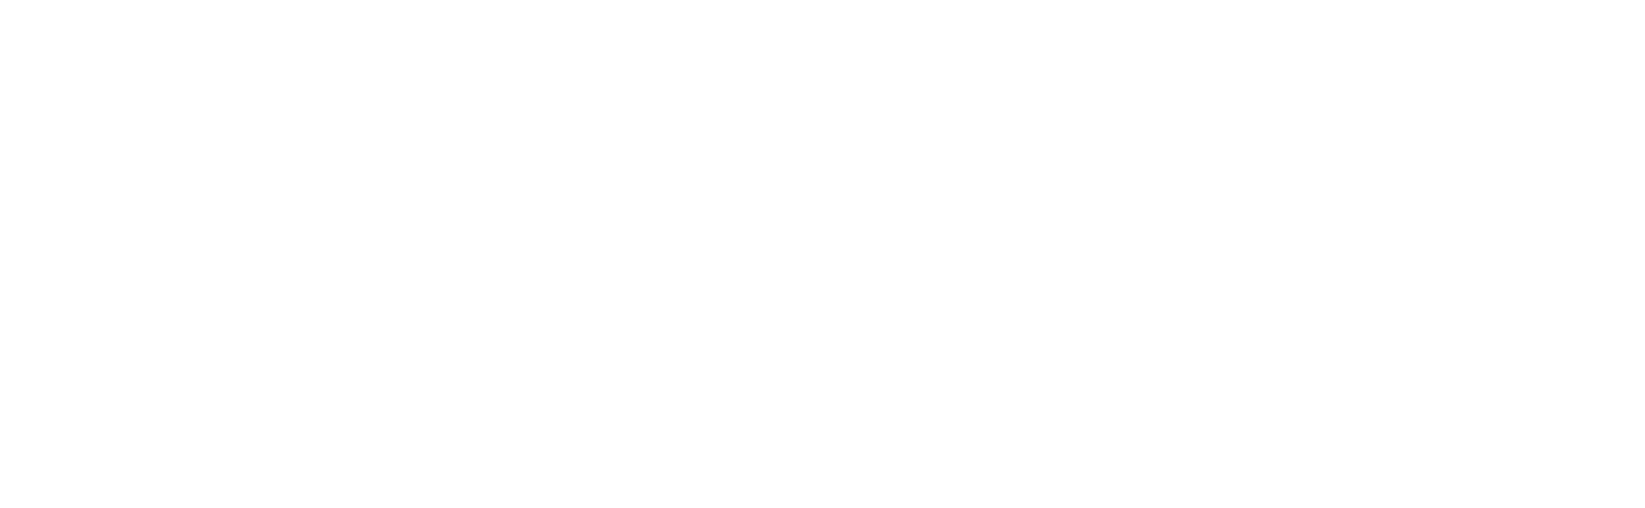 Aidvita | Natural Wellness Solutions | Backed by Science